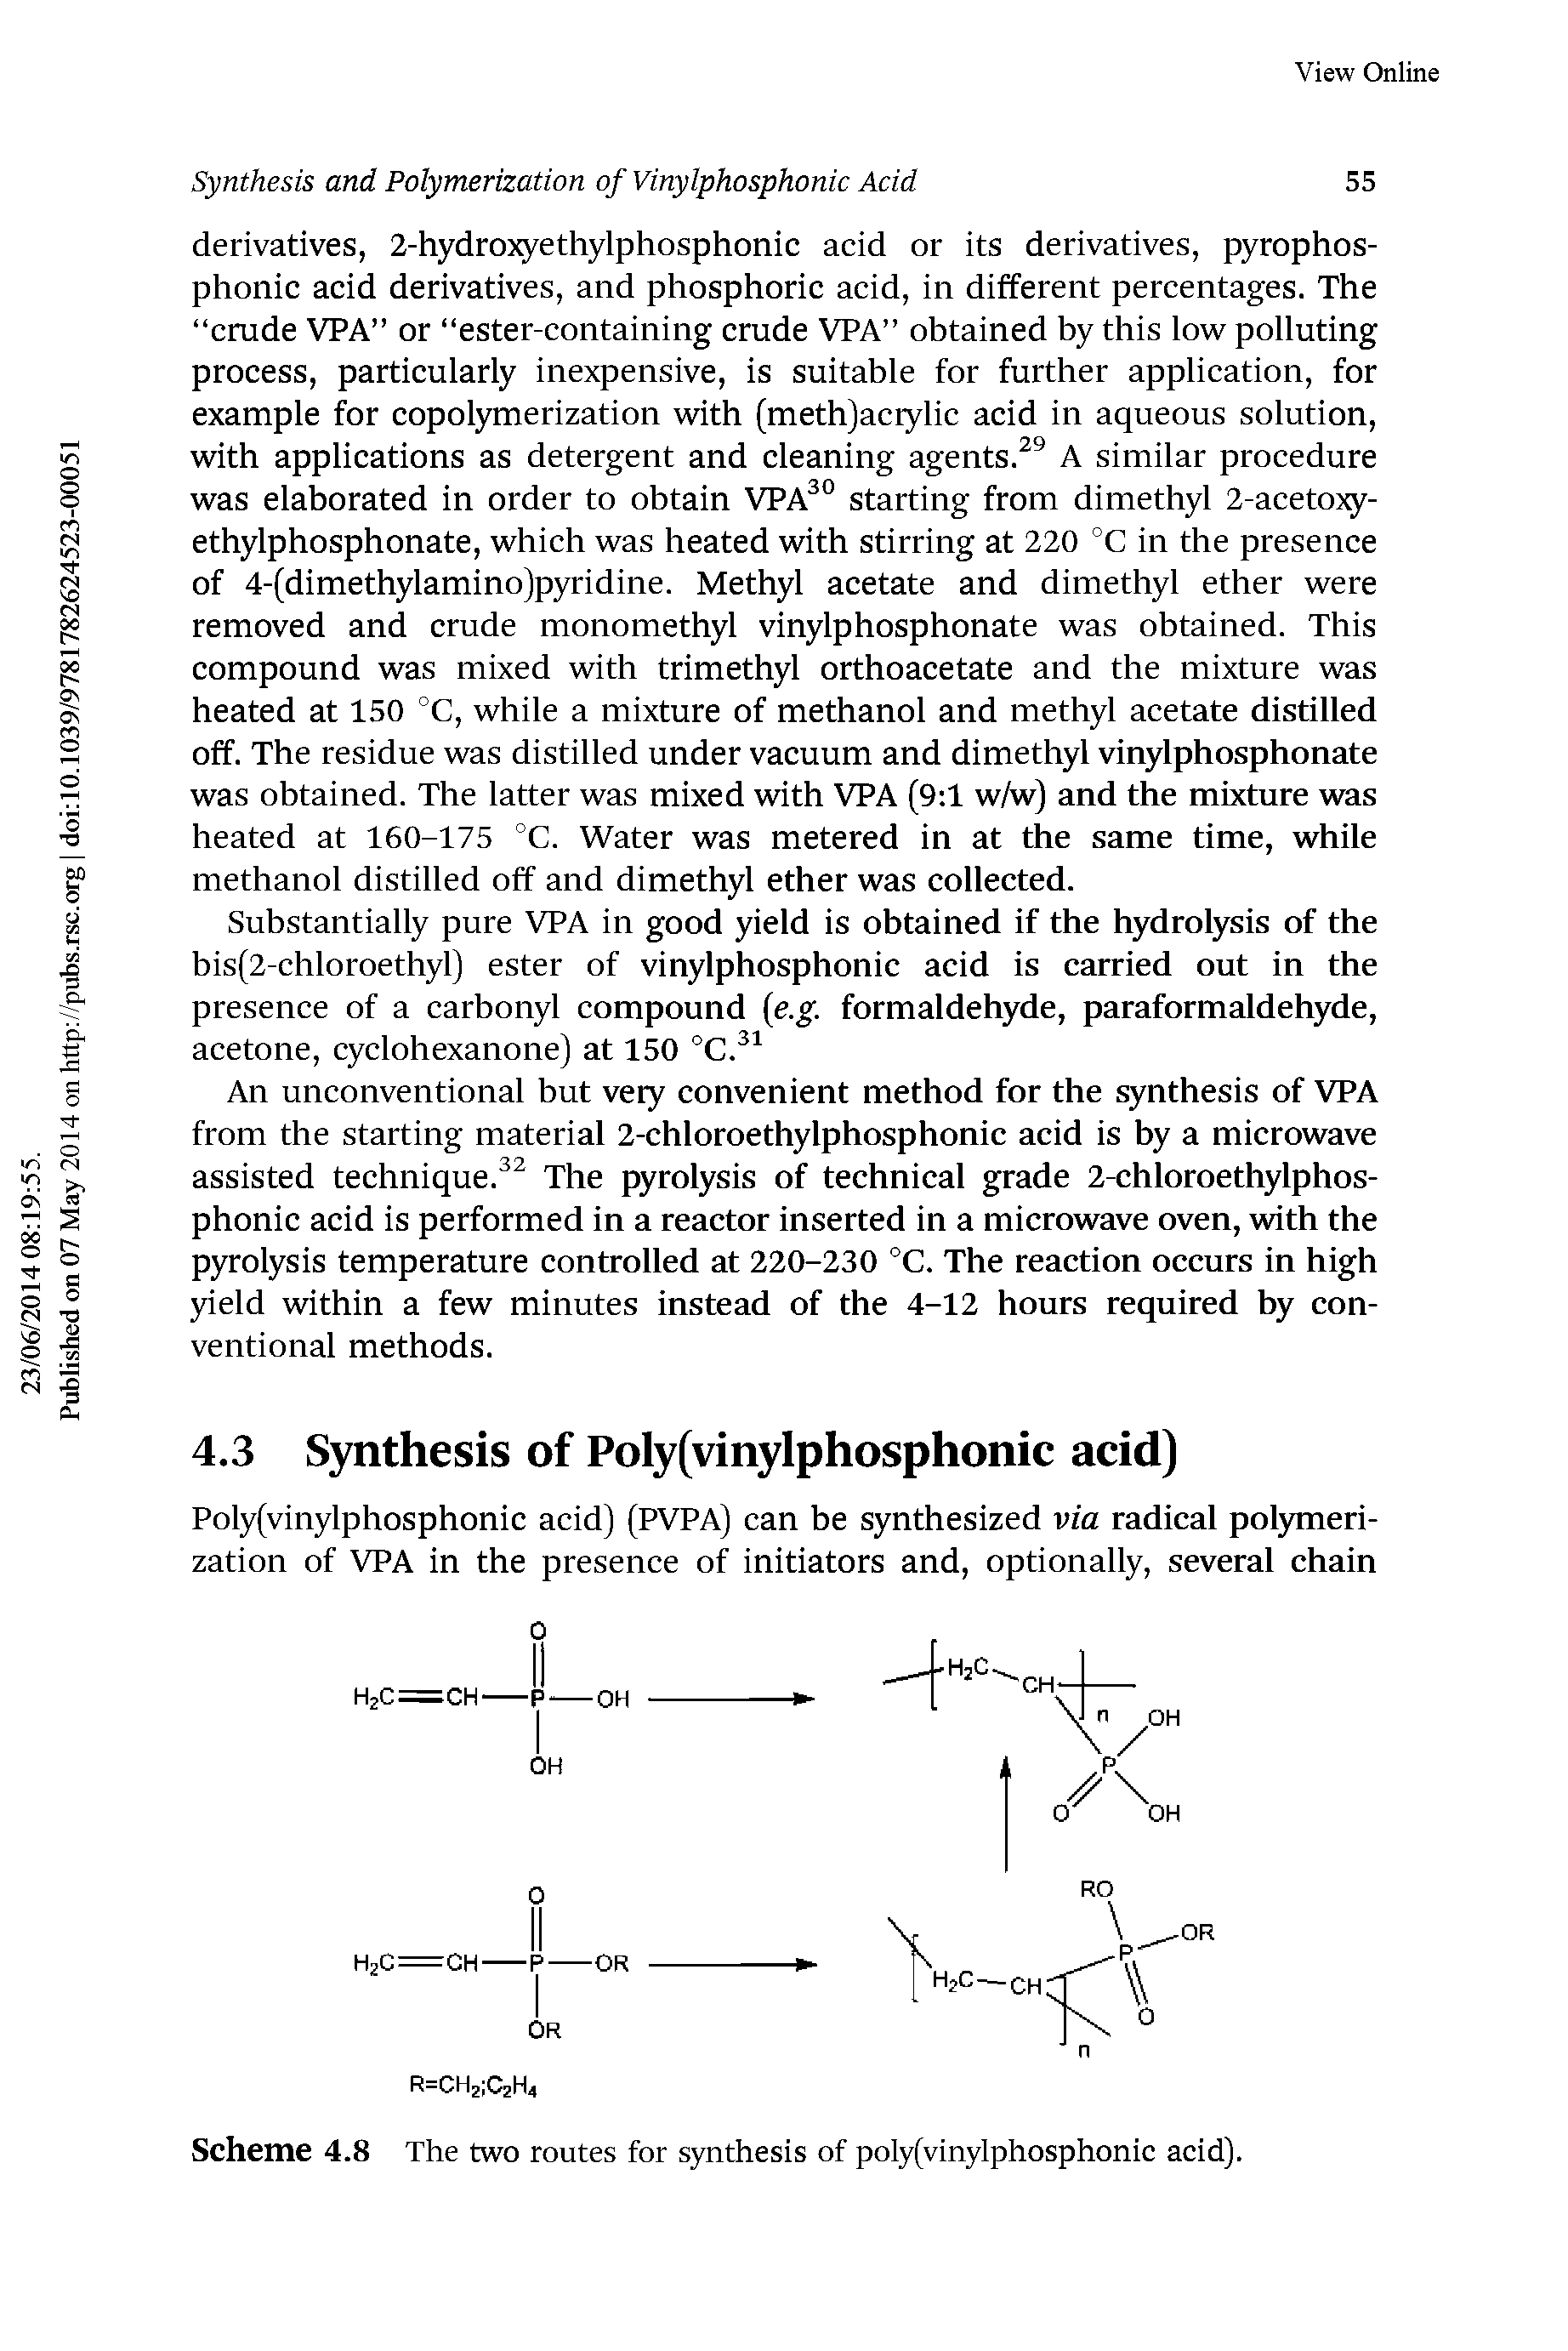 Scheme 4.8 The two routes for synthesis of poly(vinylphosphonic acid).